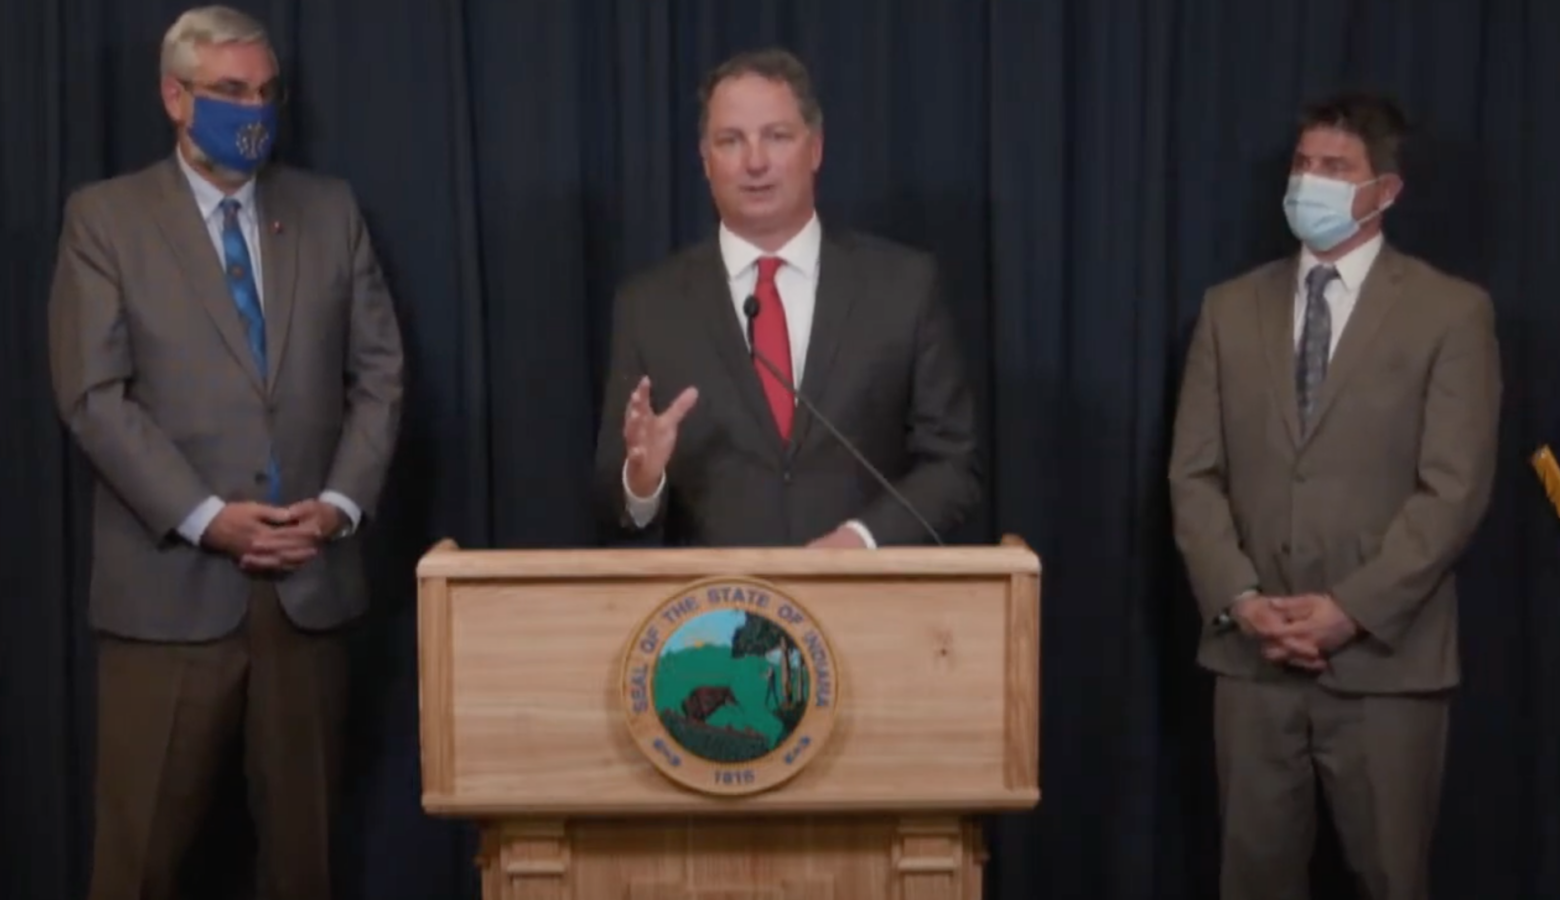 Speaker Todd Huston (R-Fishers) discusses education funding in the new state budget, flanked by Gov. Eric Holcomb, left, and Senate President Pro Tem Rodric Bray (R-Martinsville), right. (Screenshot from YouTube)